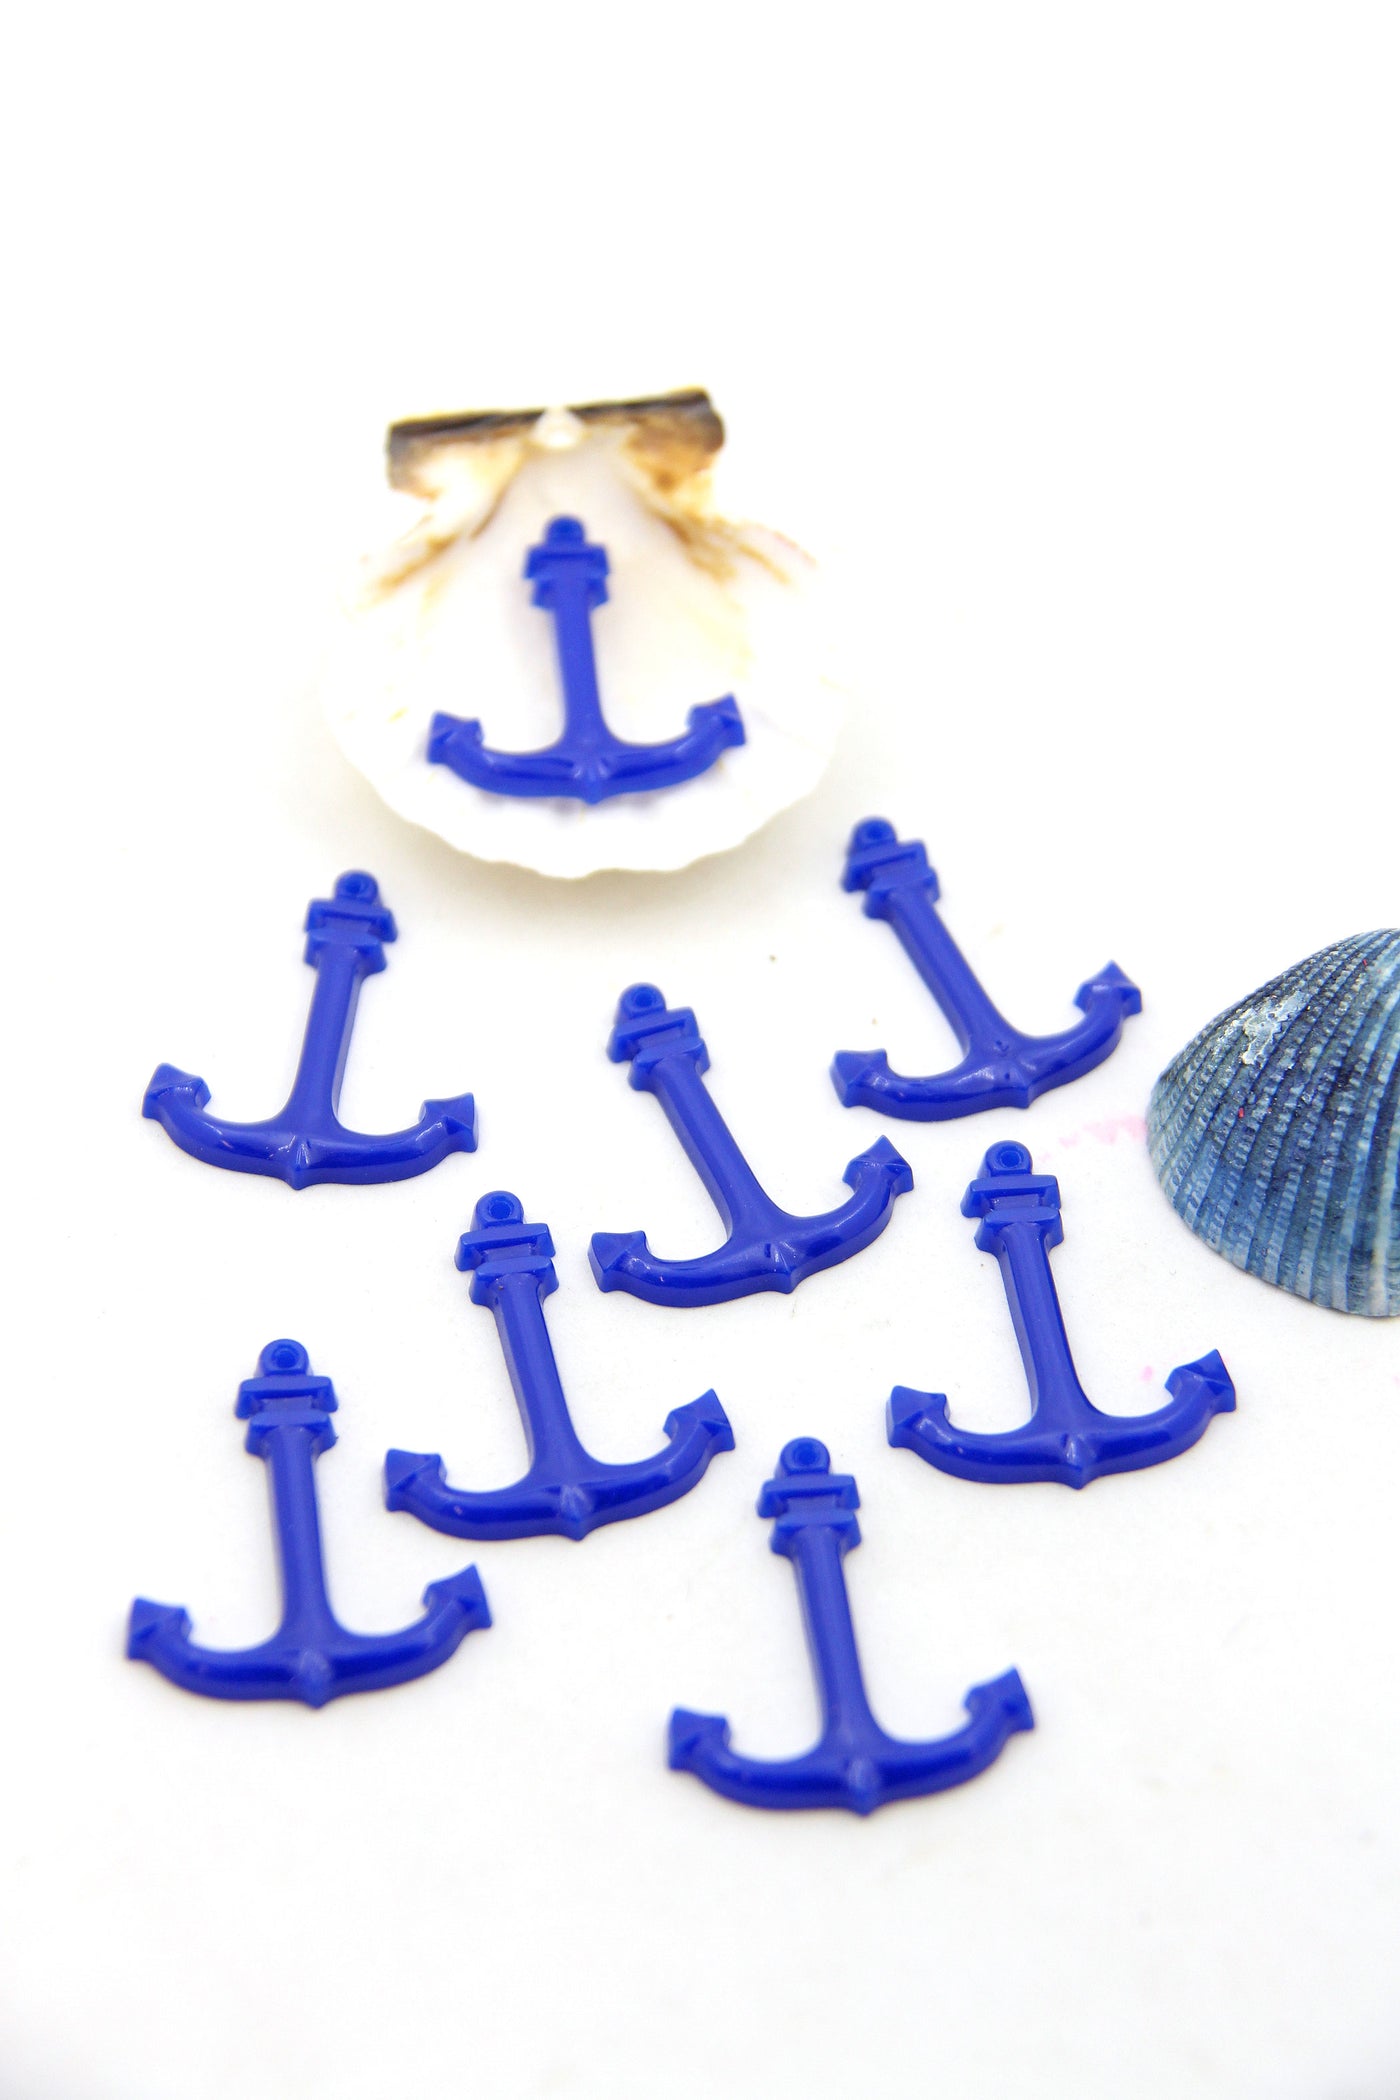 Navy Anchor charm for making DIY beach jewelry